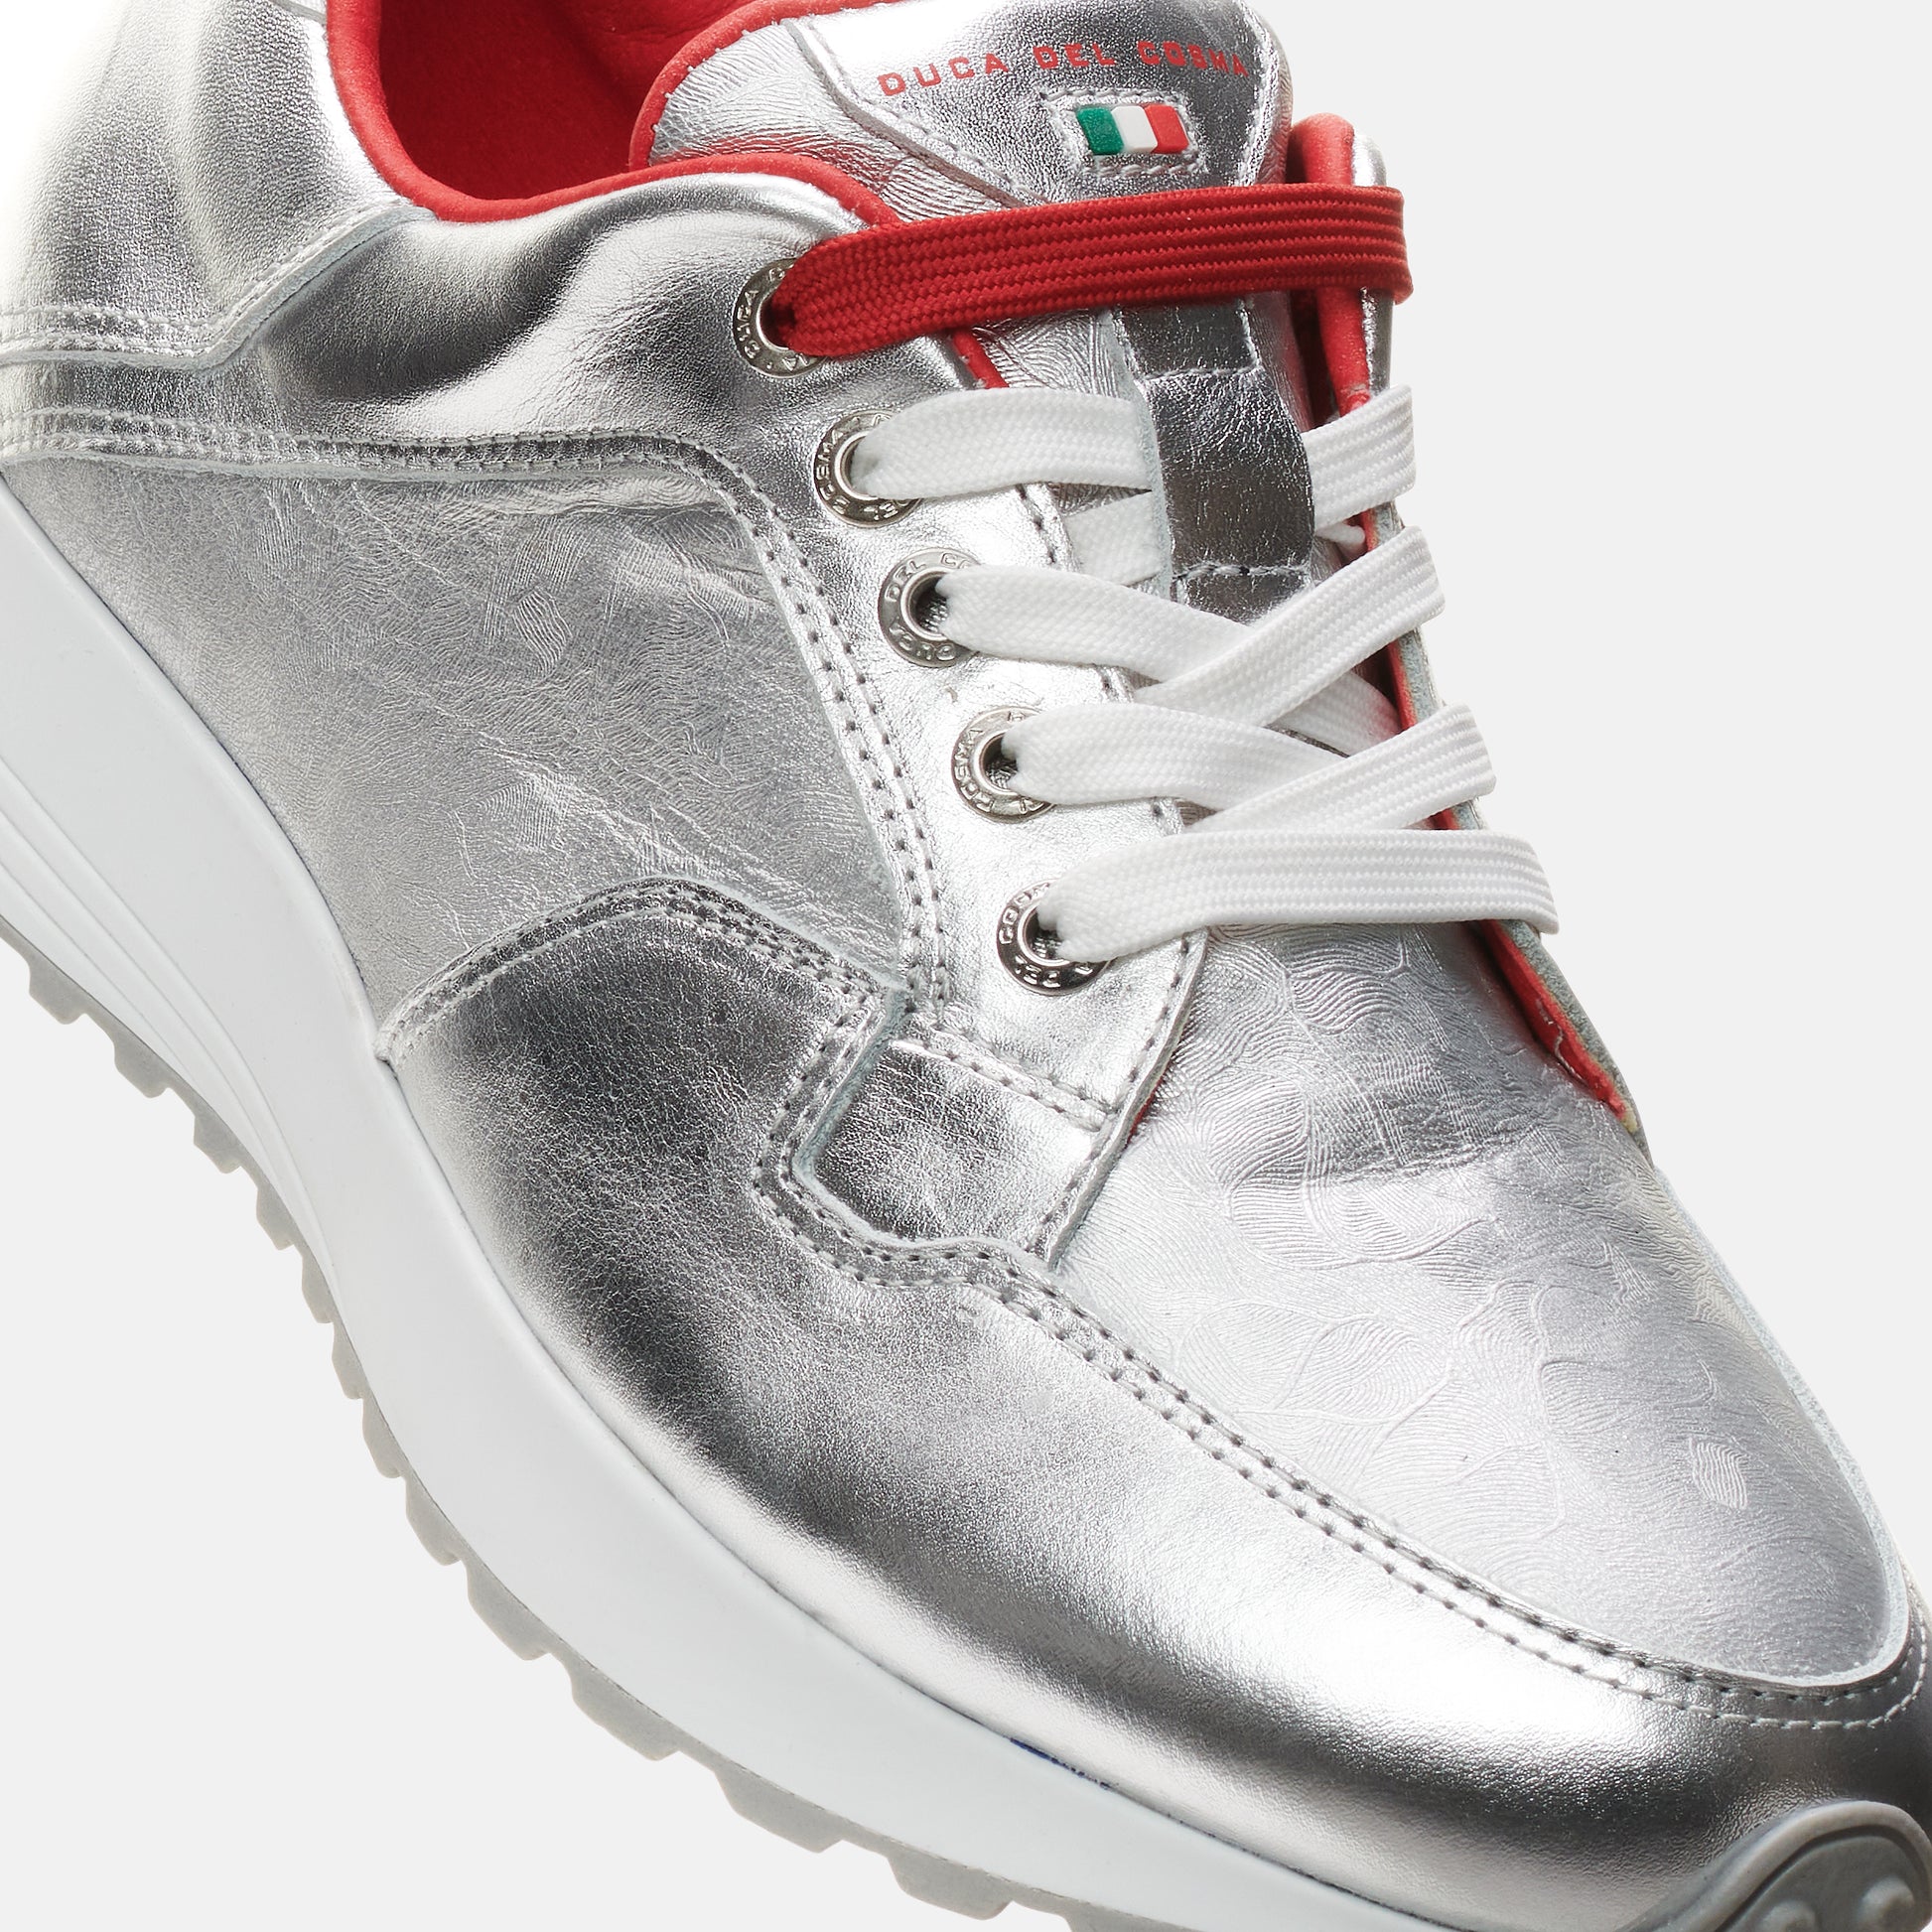 Boreal Silver Women's Golf Shoes Duca del Cosma Waterproof best golf shoe for the golf course